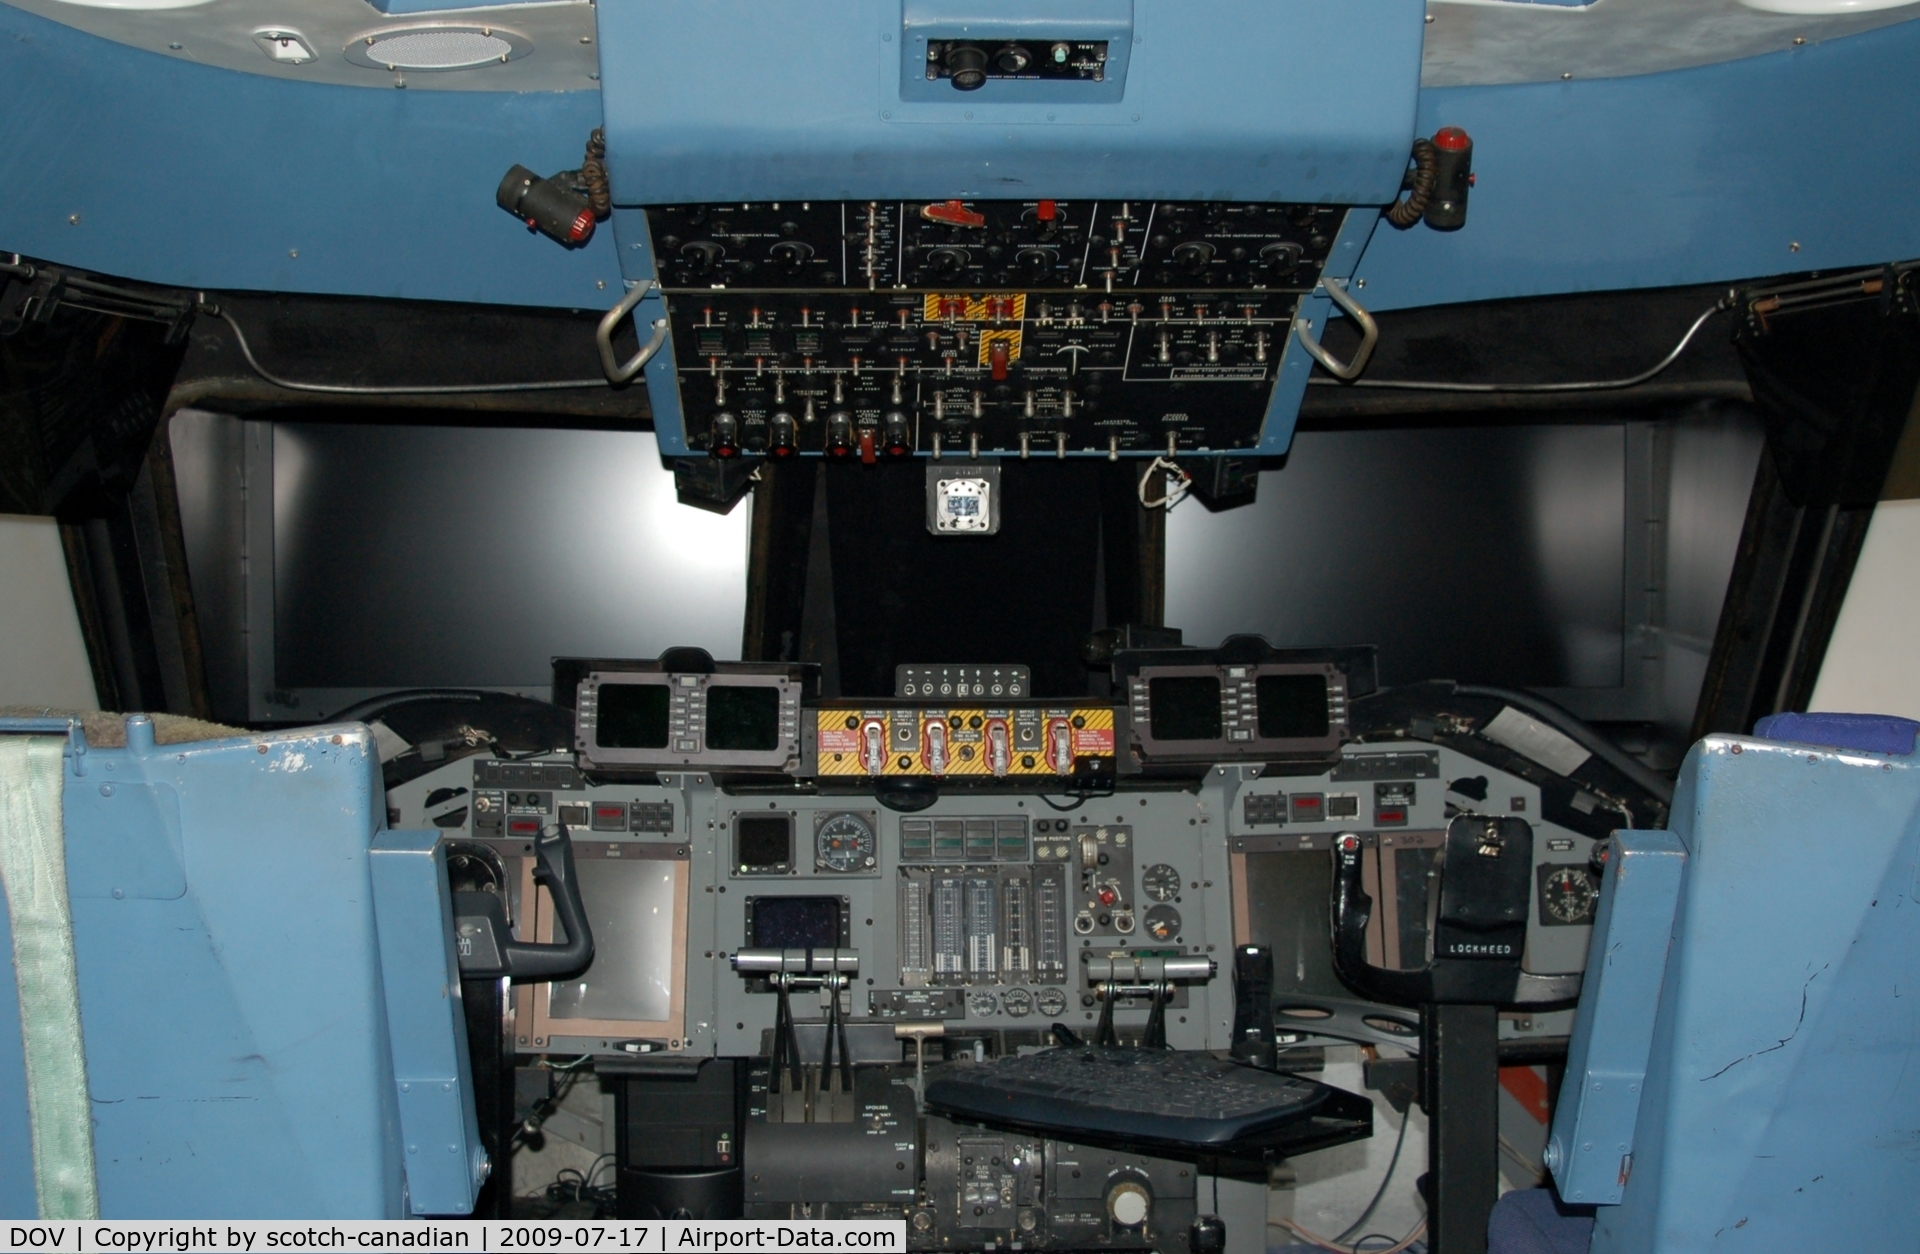 Dover Afb Airport (DOV) - C-141C Glass Cockpit Simulator at the Air Mobility Command Museum, Dover AFB, DE